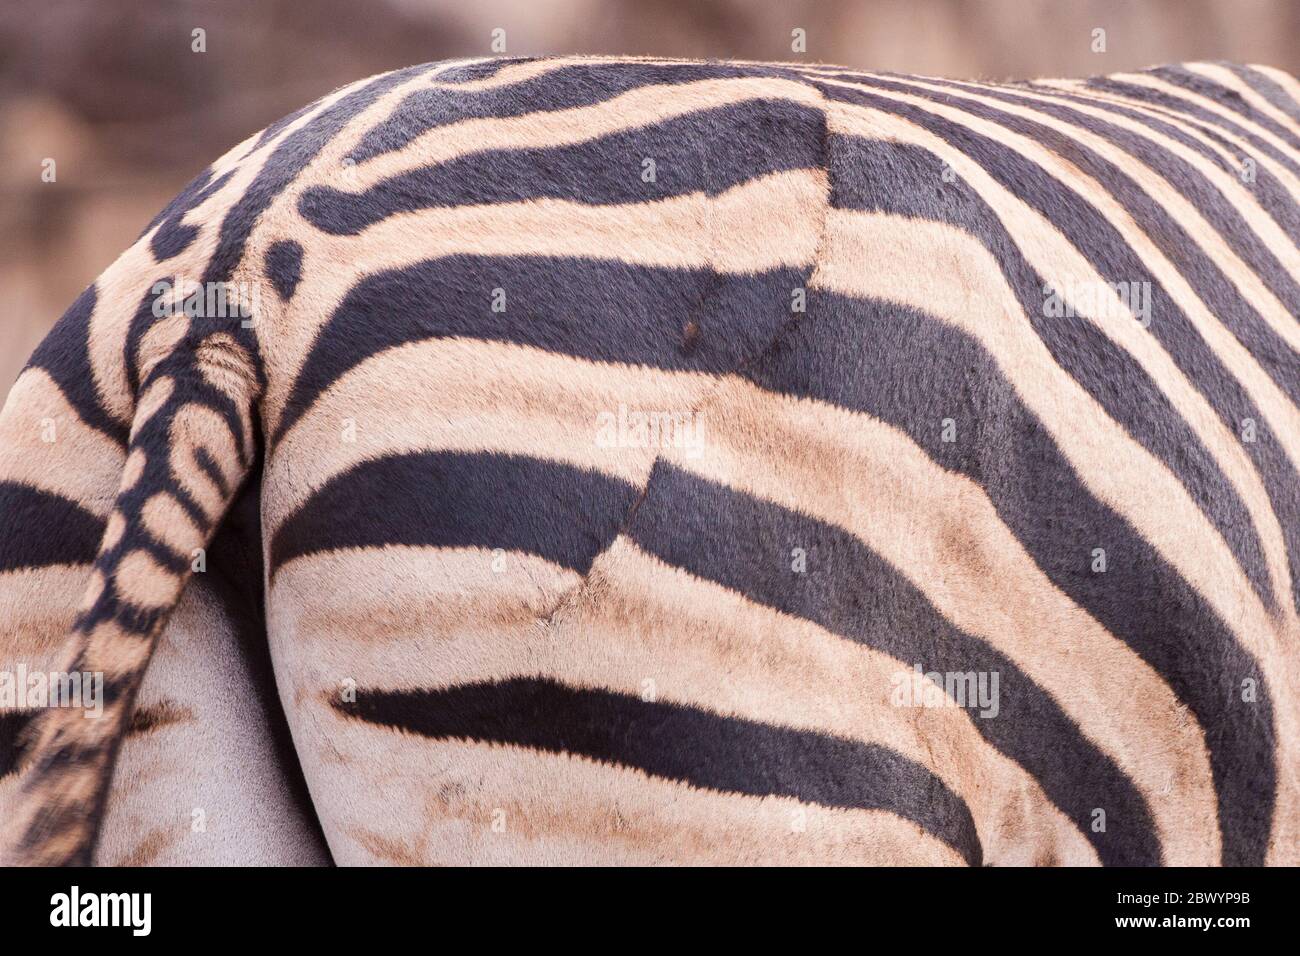 Healed wound from a Lion attack on a Zebra Kruger Park South Africa Stock Photo